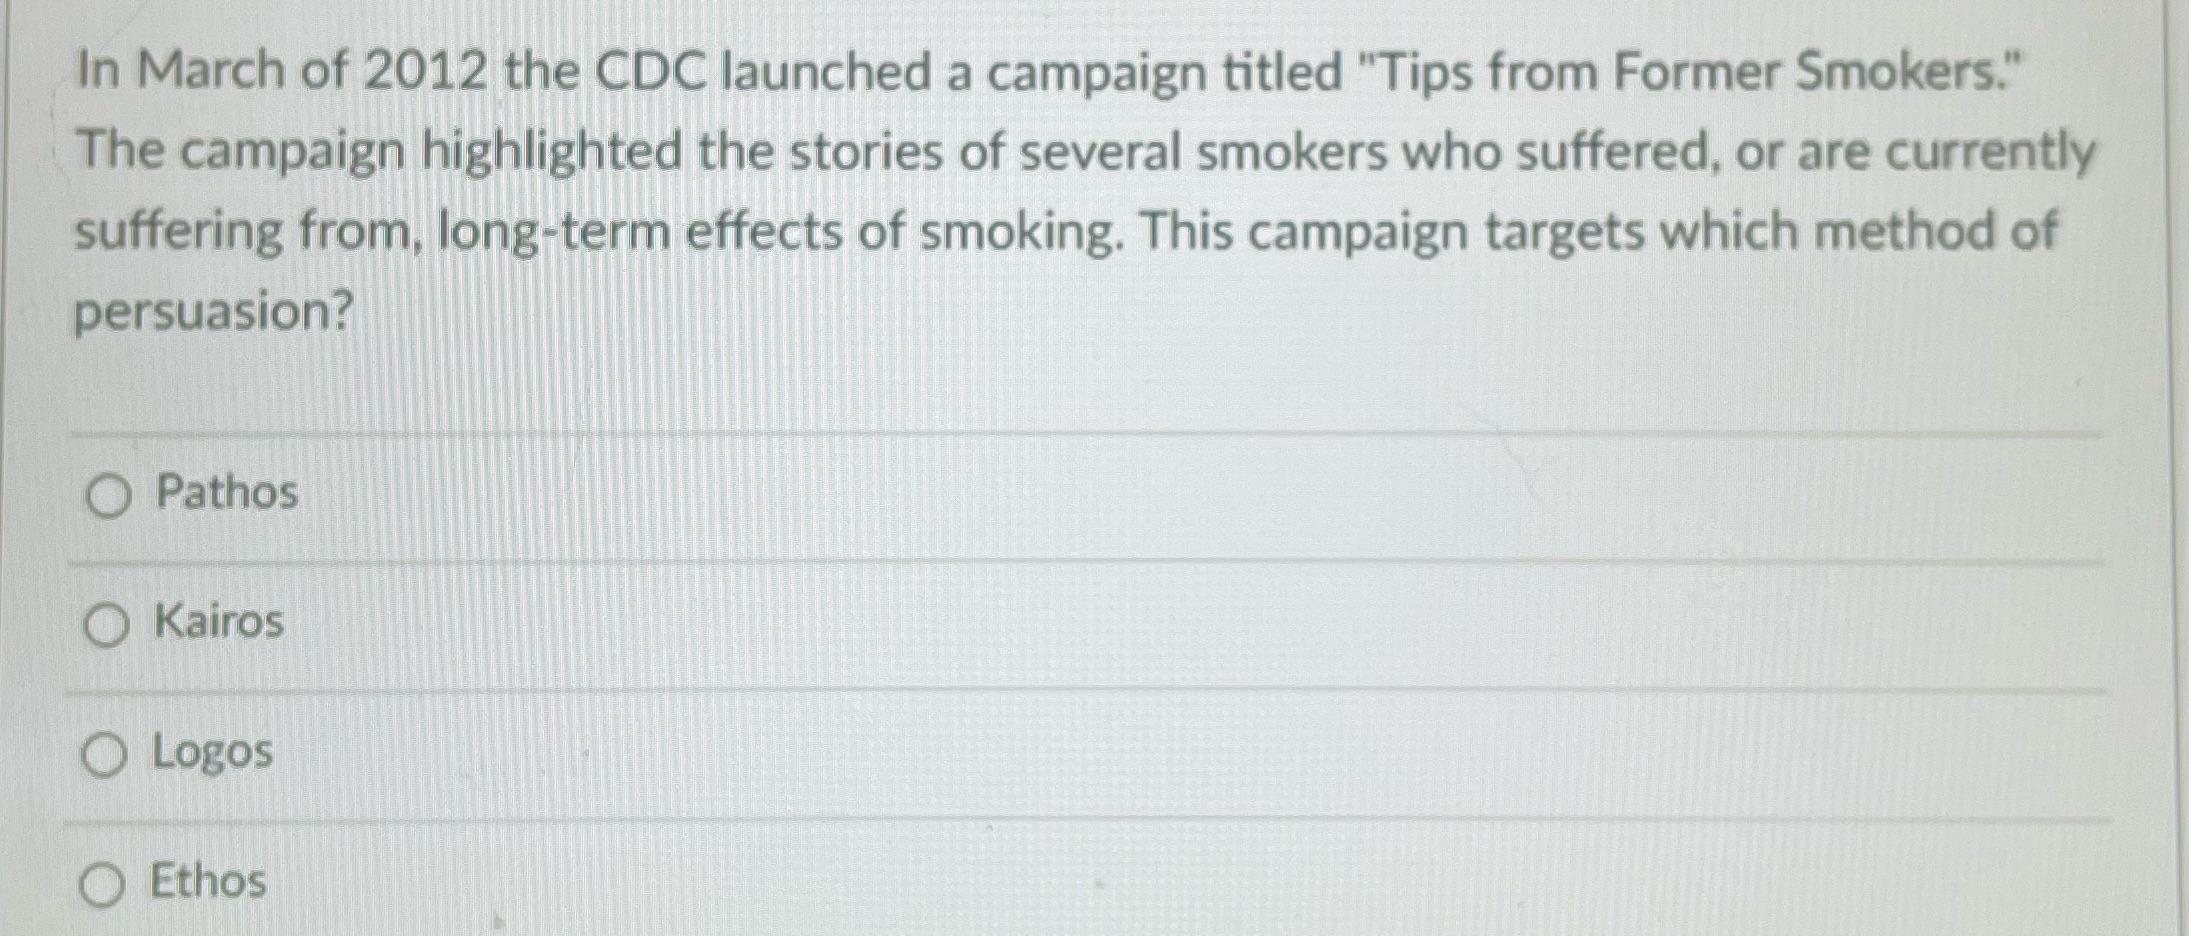 In March of 2012 the CDC launched a campaign titled 